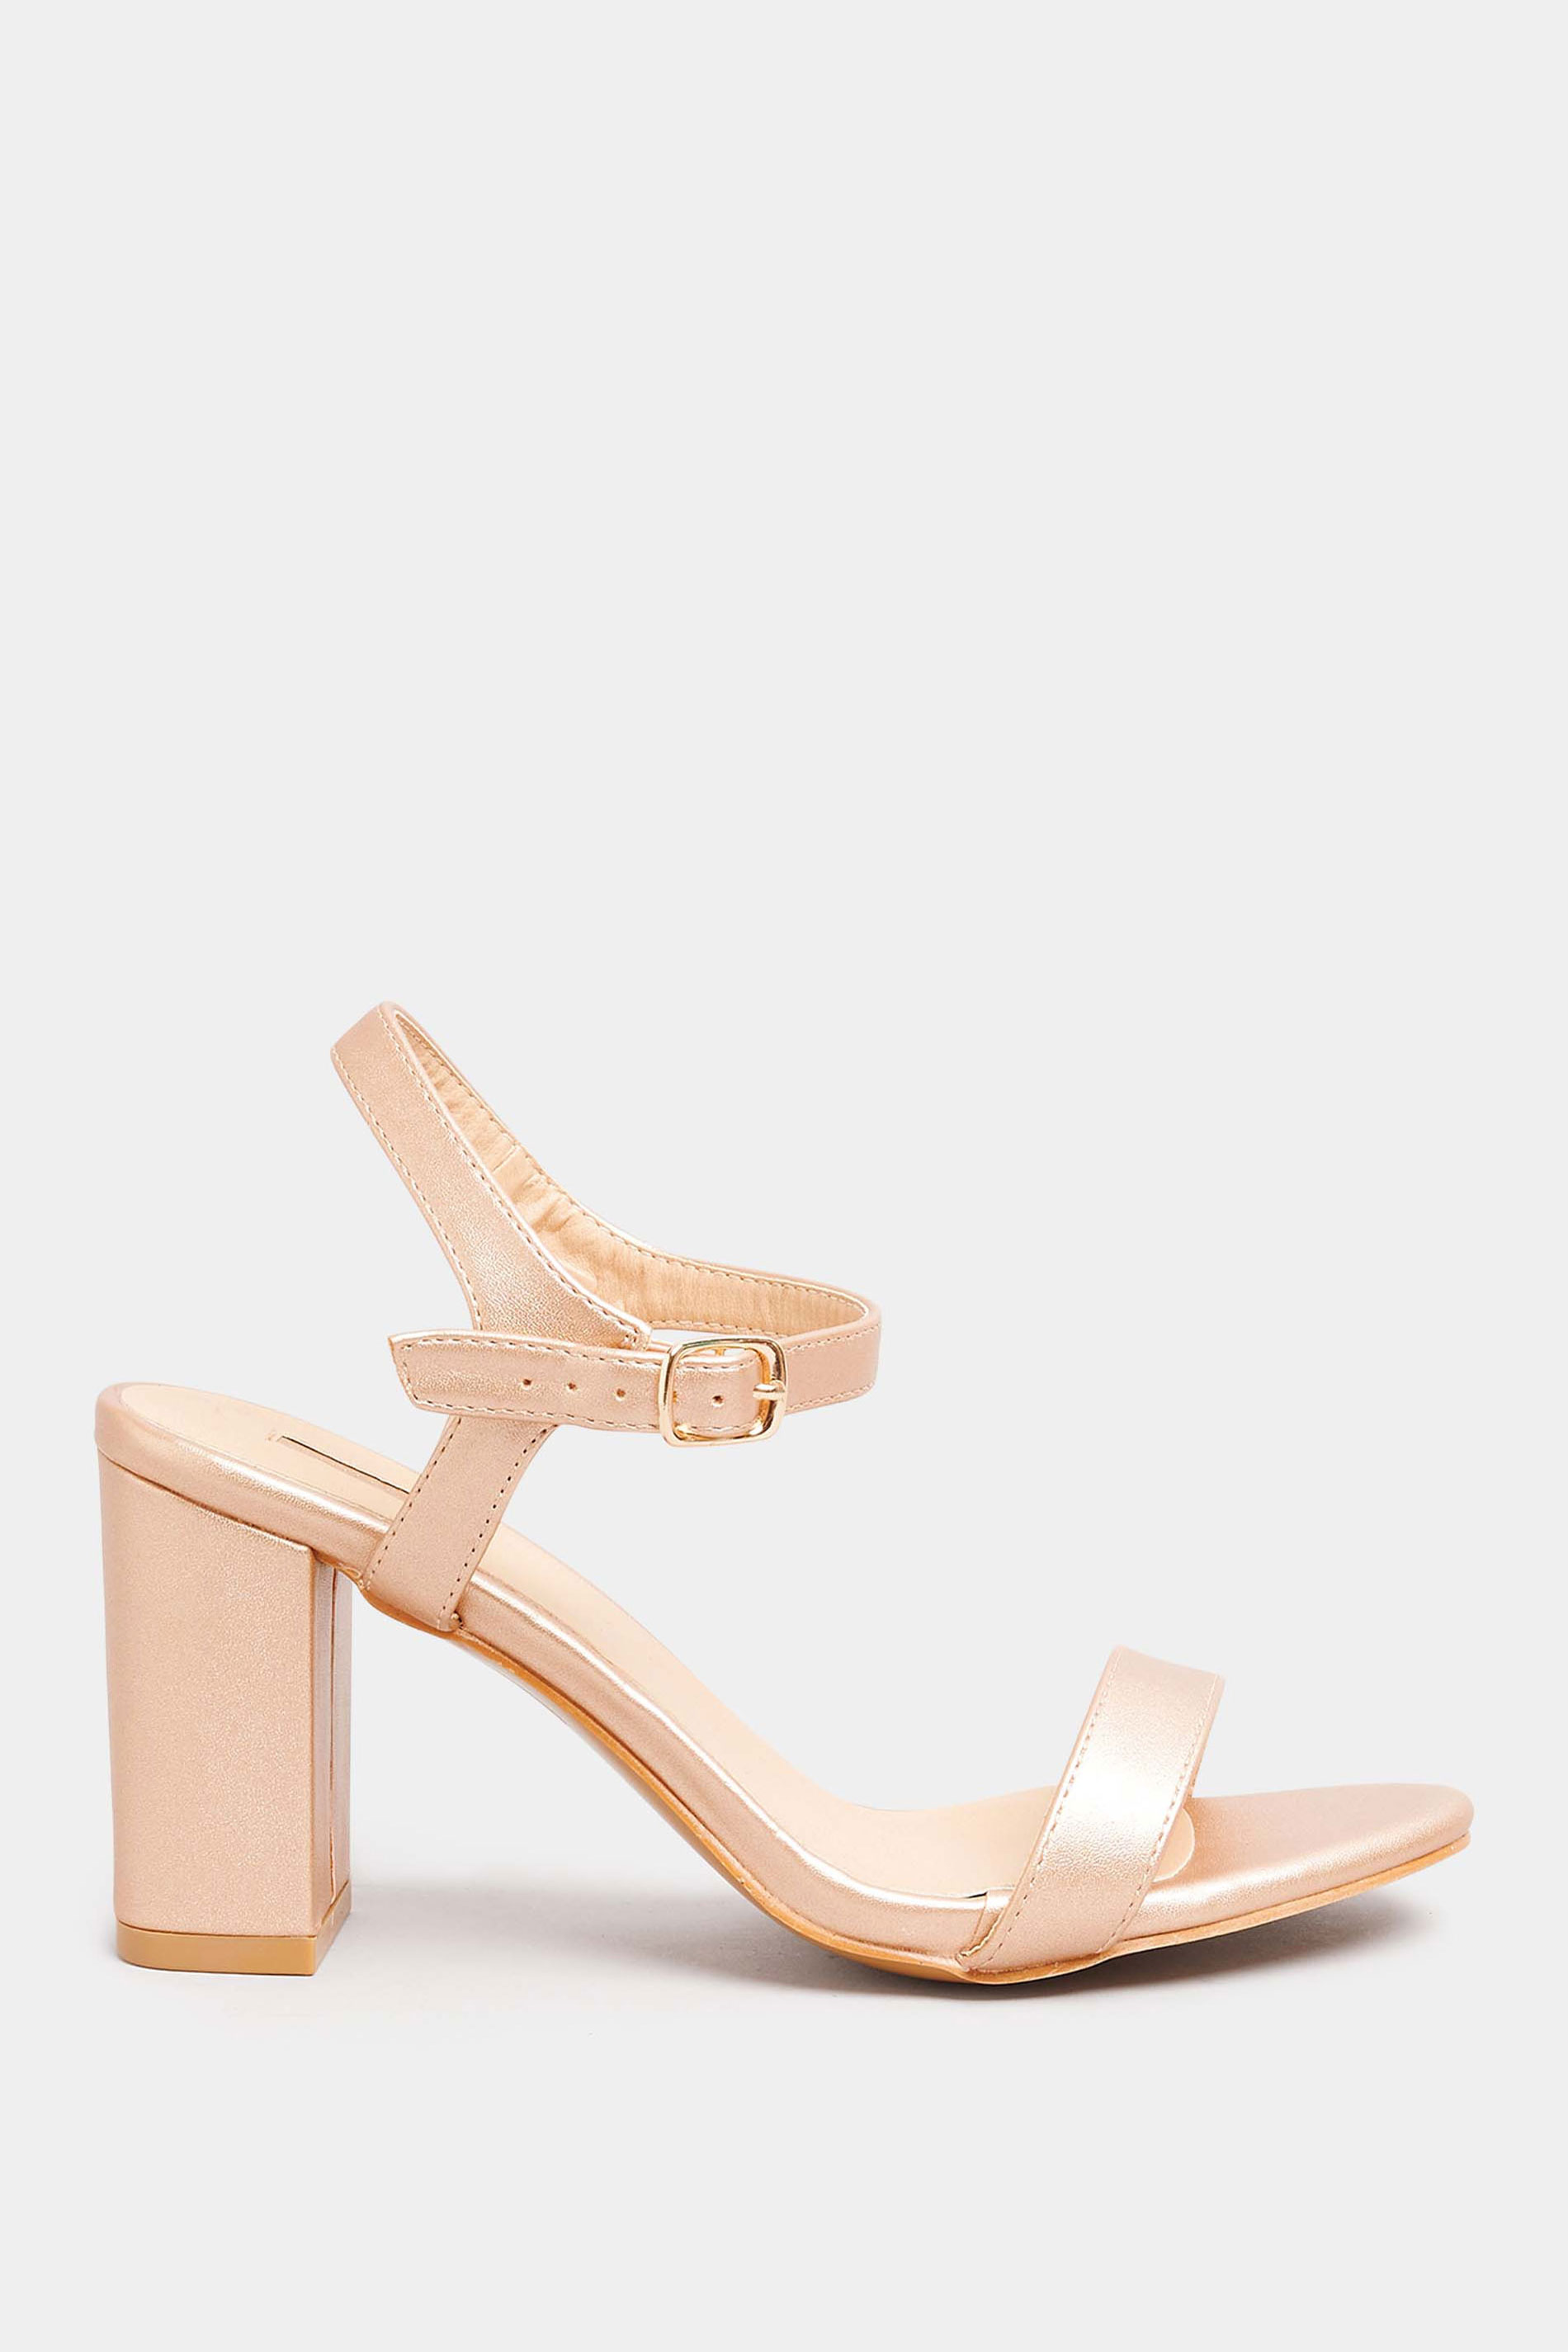 LIMITED COLLECTION Rose Gold Block Heel Sandals In Wide E Fit & Extra Wide Fit | Yours Clothing 3